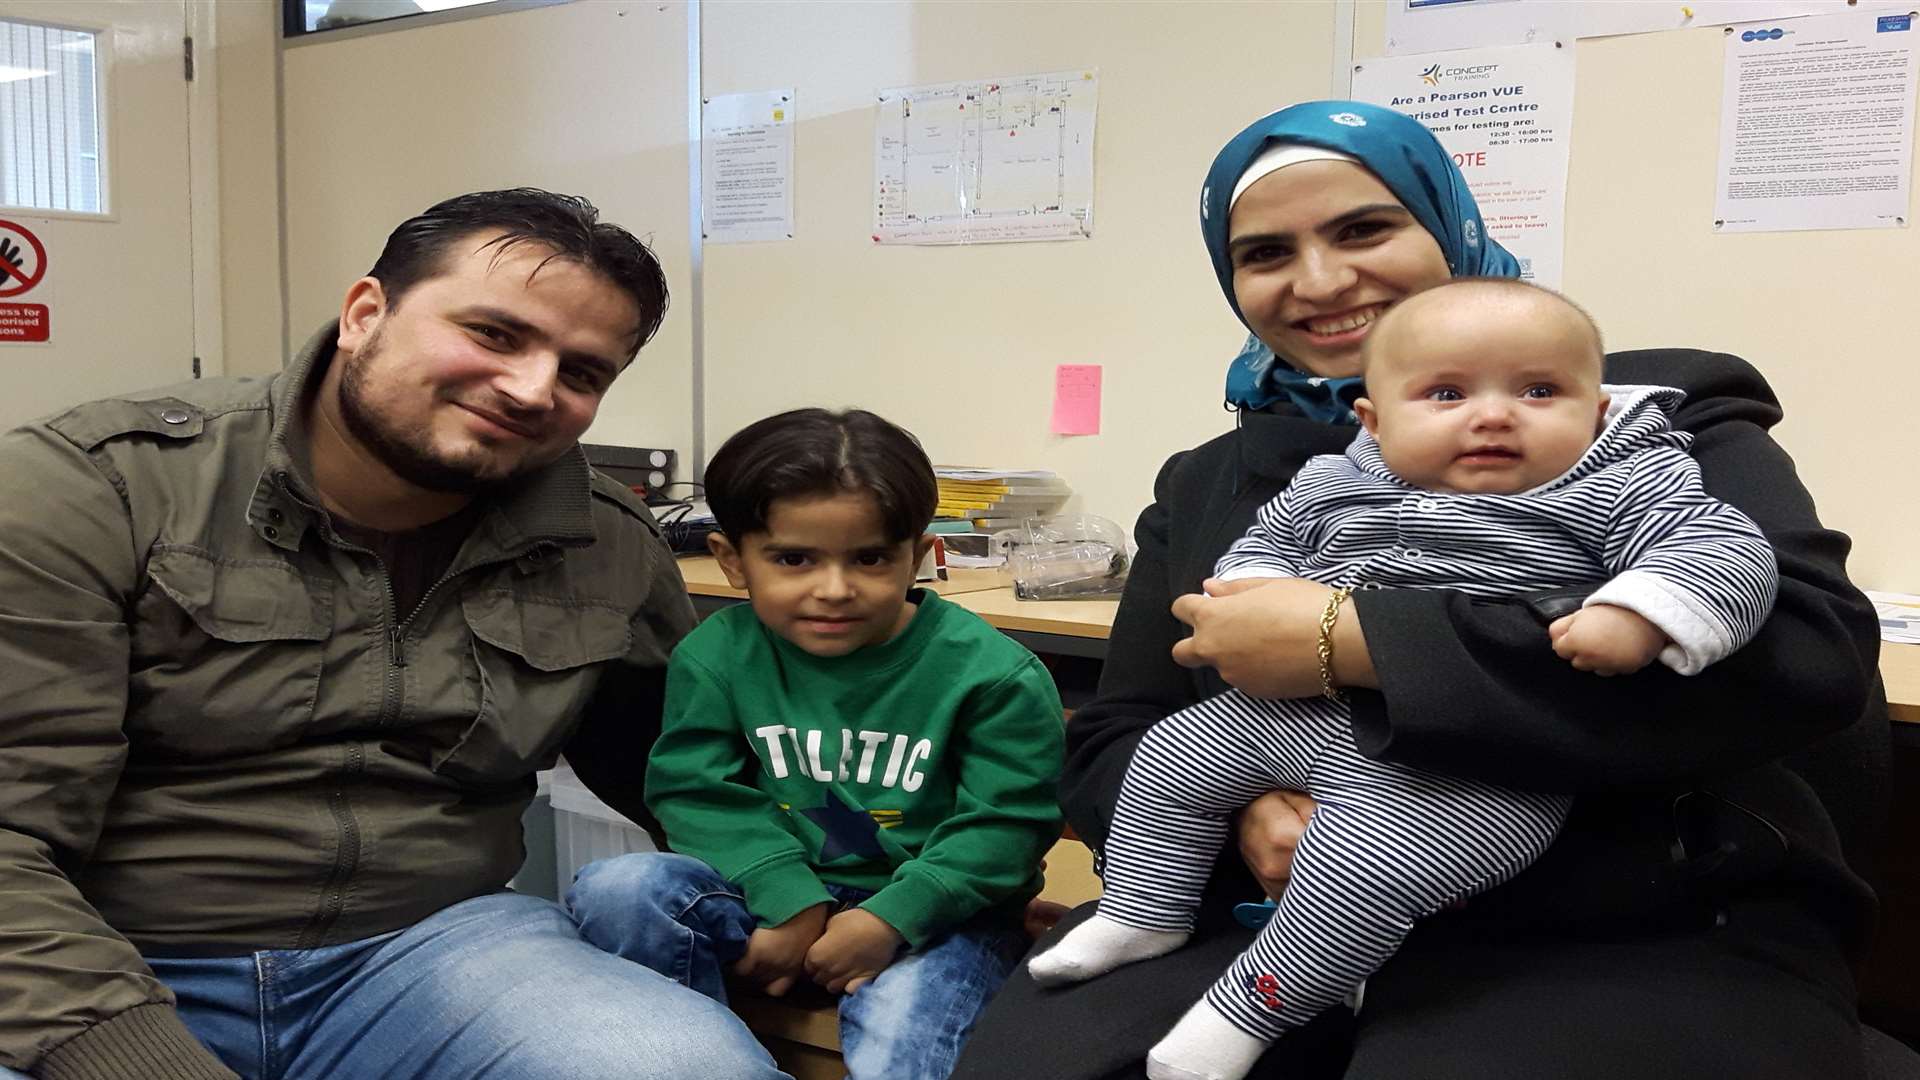 Syrian refugees Ismaeil Ismaeil with his son Rida, and his wife Jamila Nabolsi with her baby son Rital